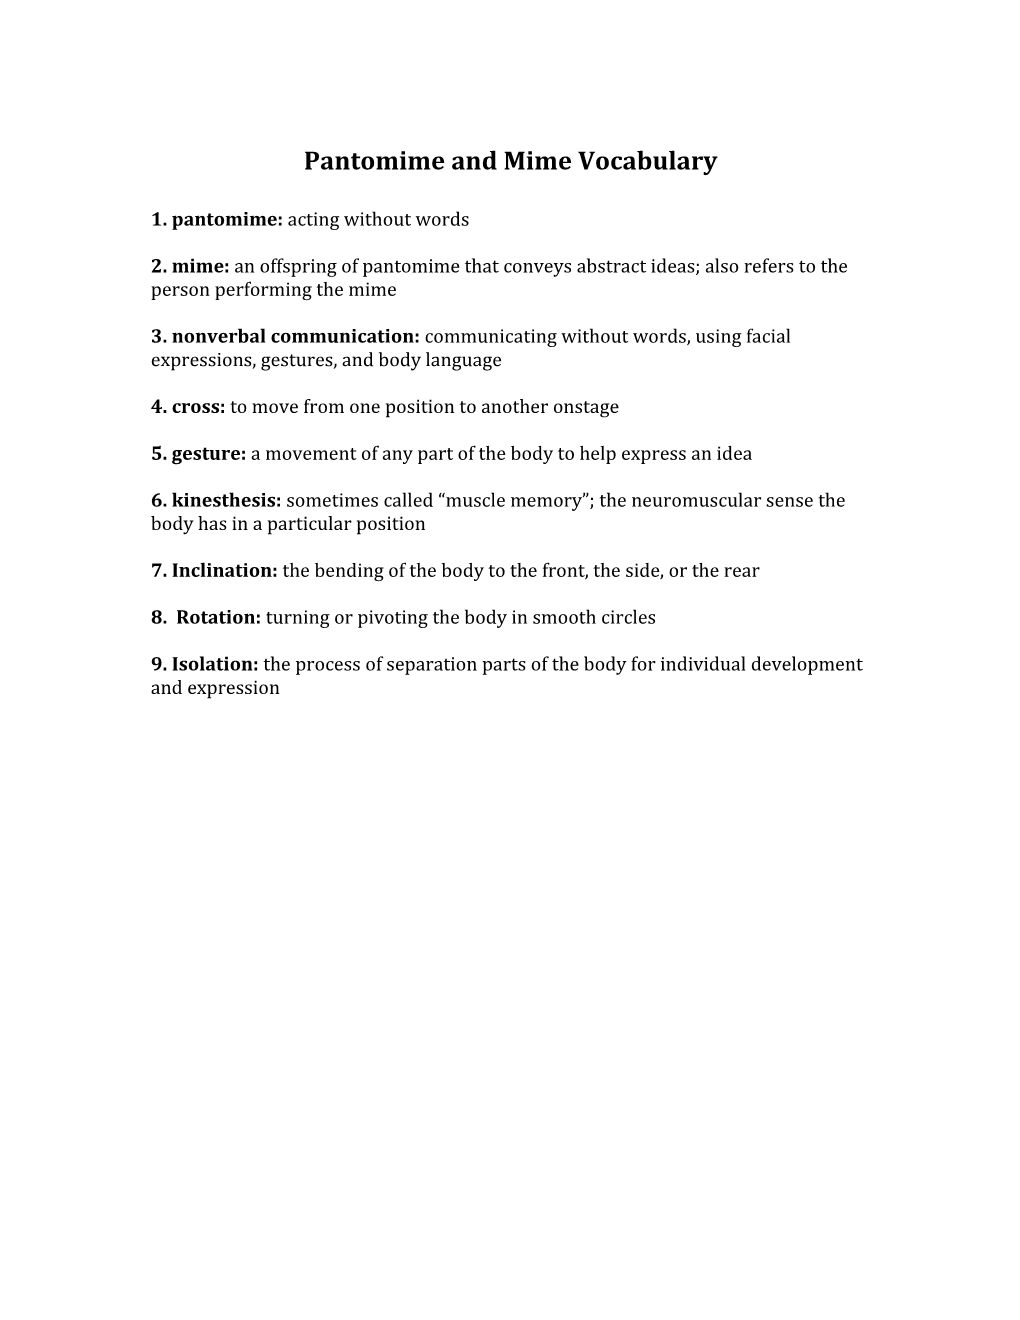 Pantomime and Mime Study Guide